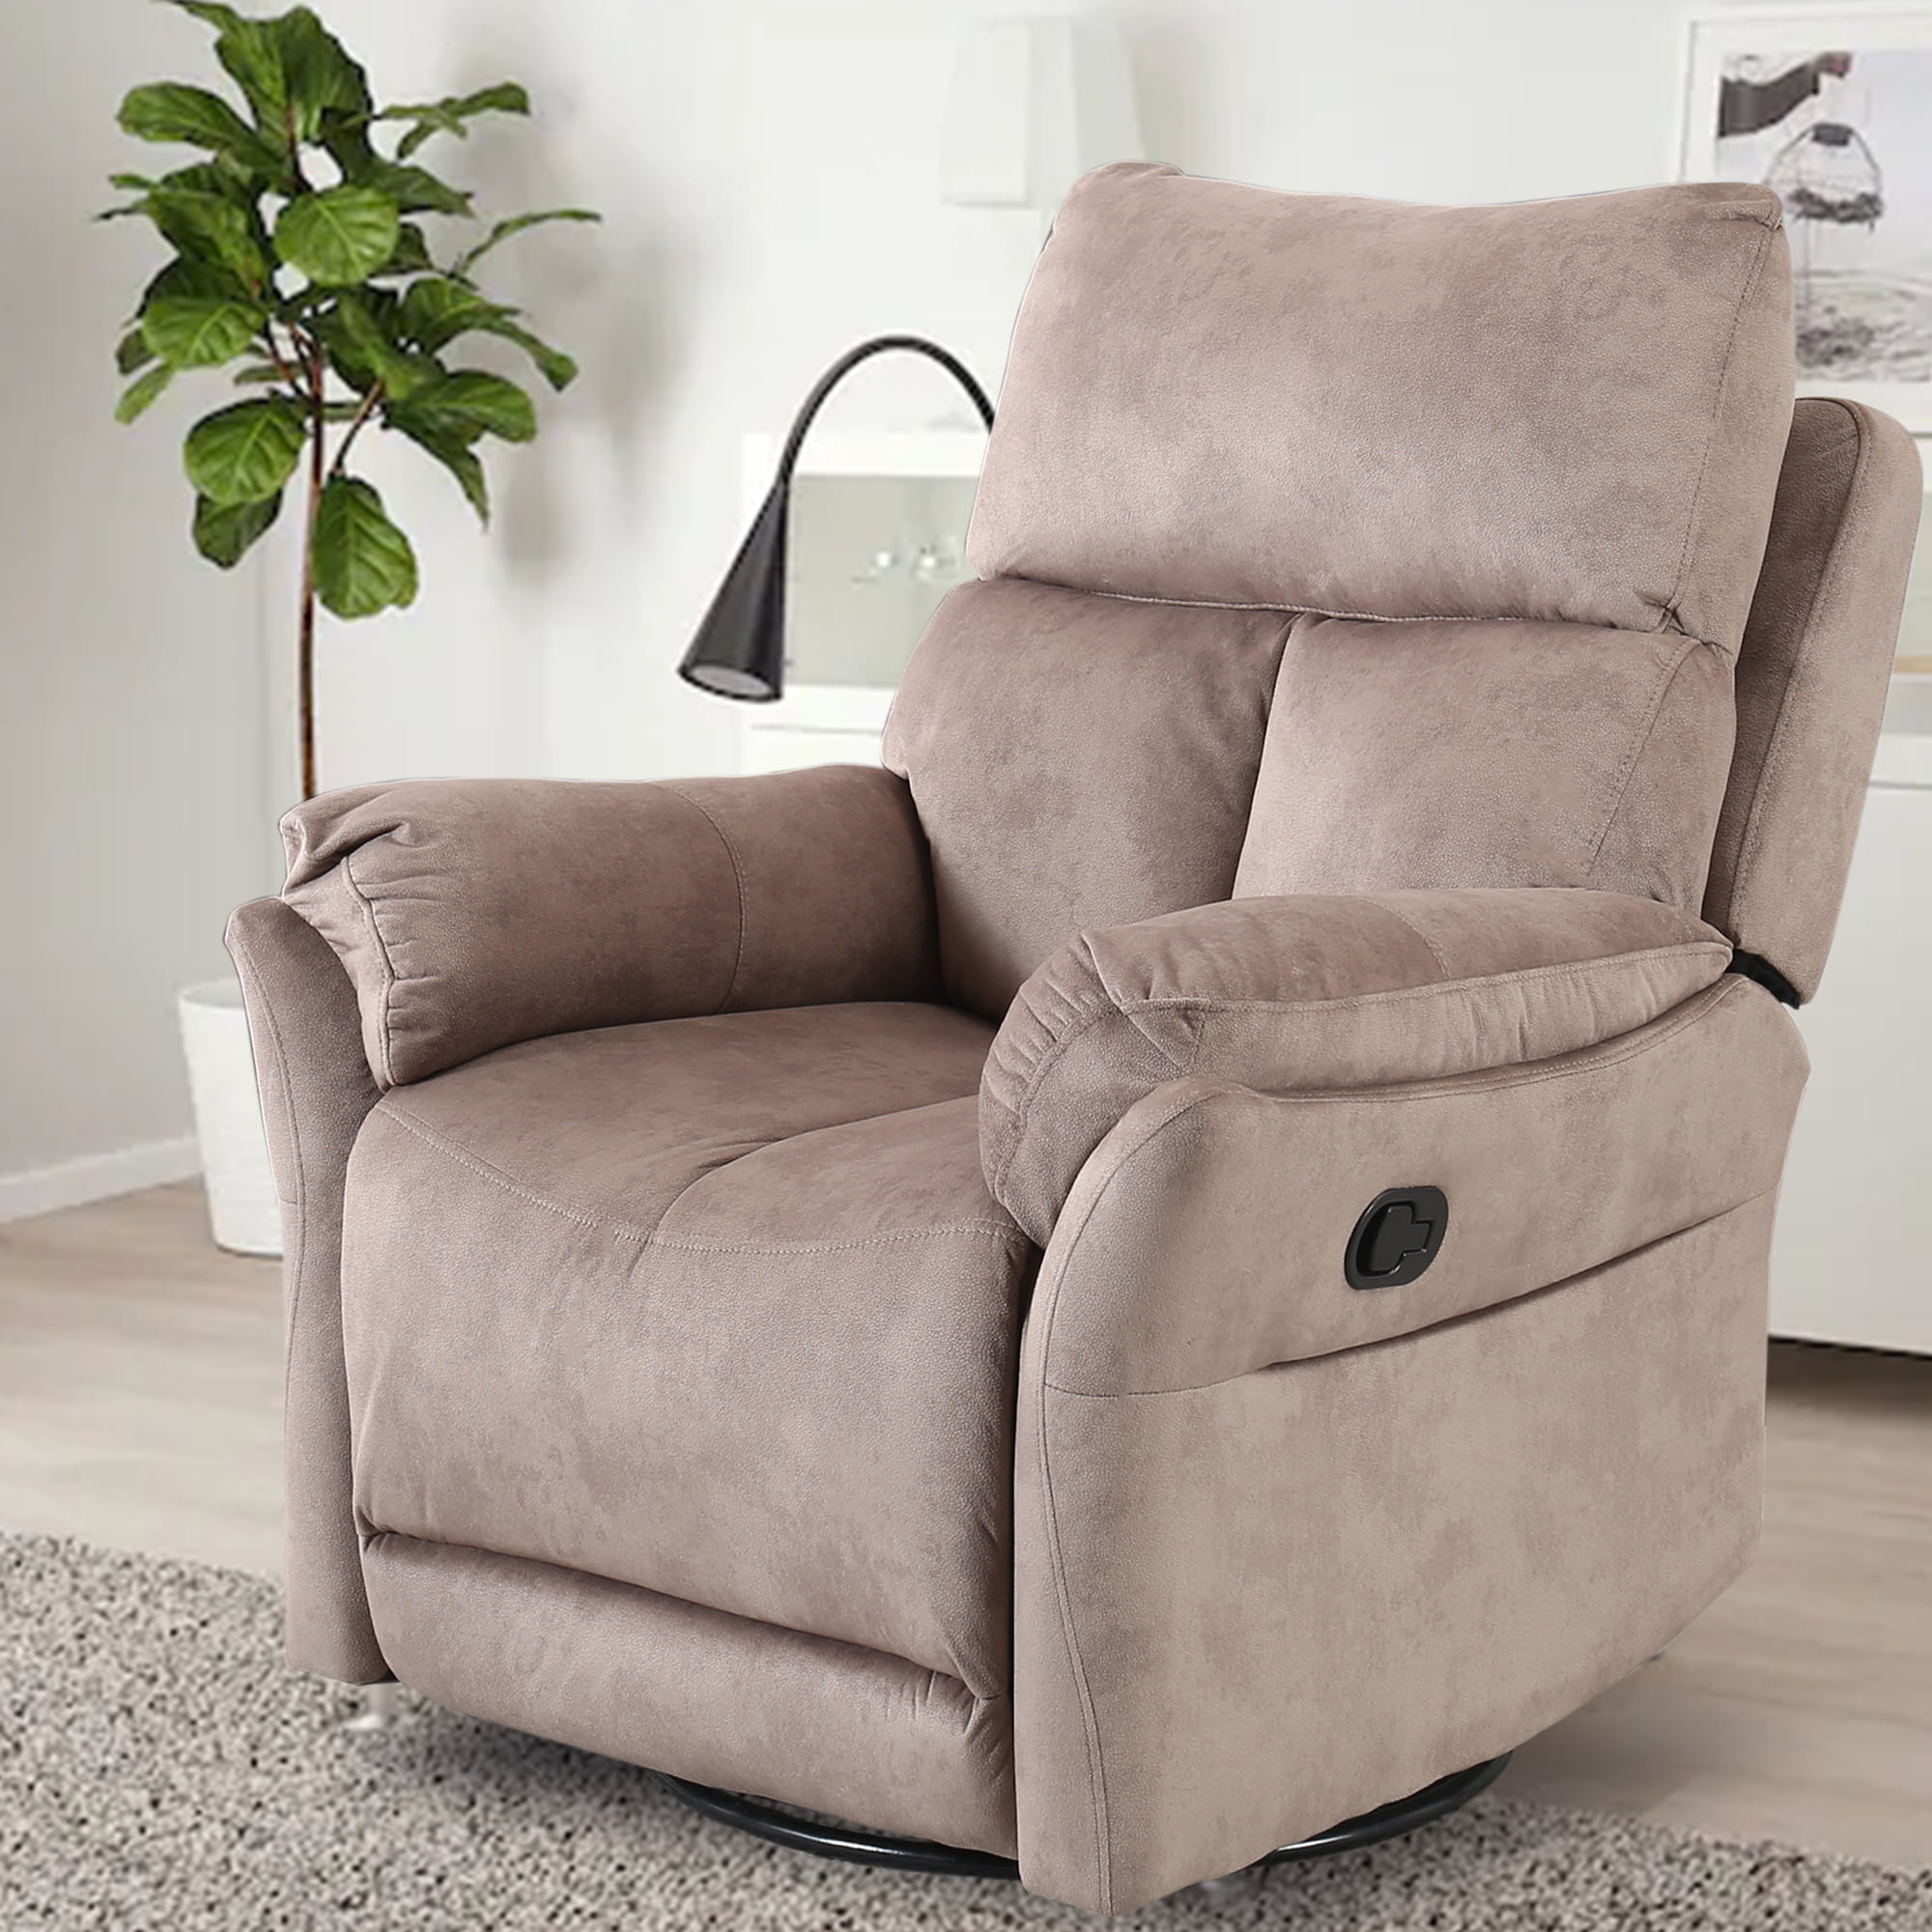 Ergonomic Reclining Chairs for Adult, BTMWAY 360 Degree Swivel Recliner